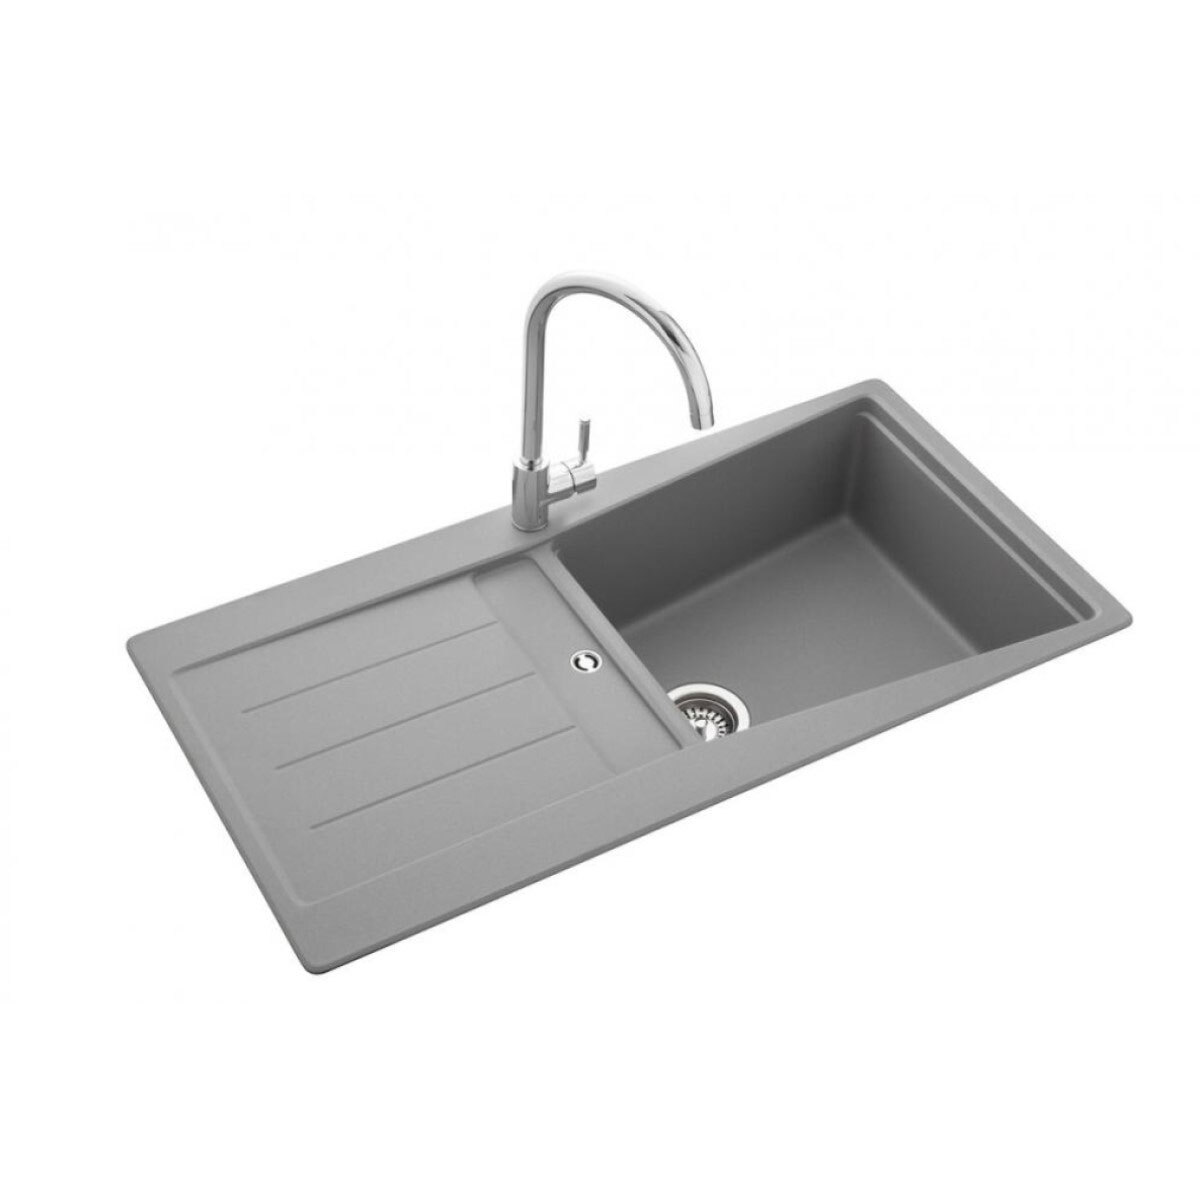 Cut out image of sink on white background